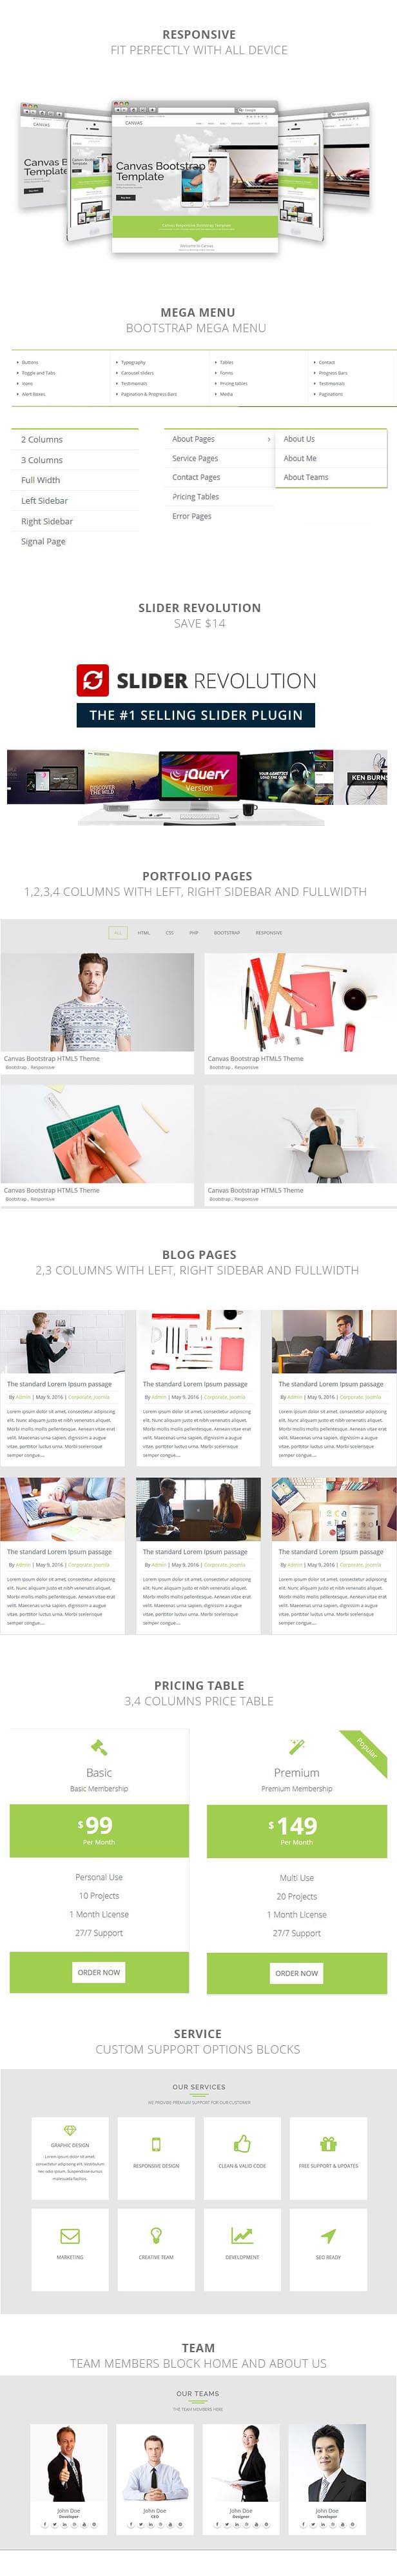 The Canvas Responsive HTML5 Template - 1